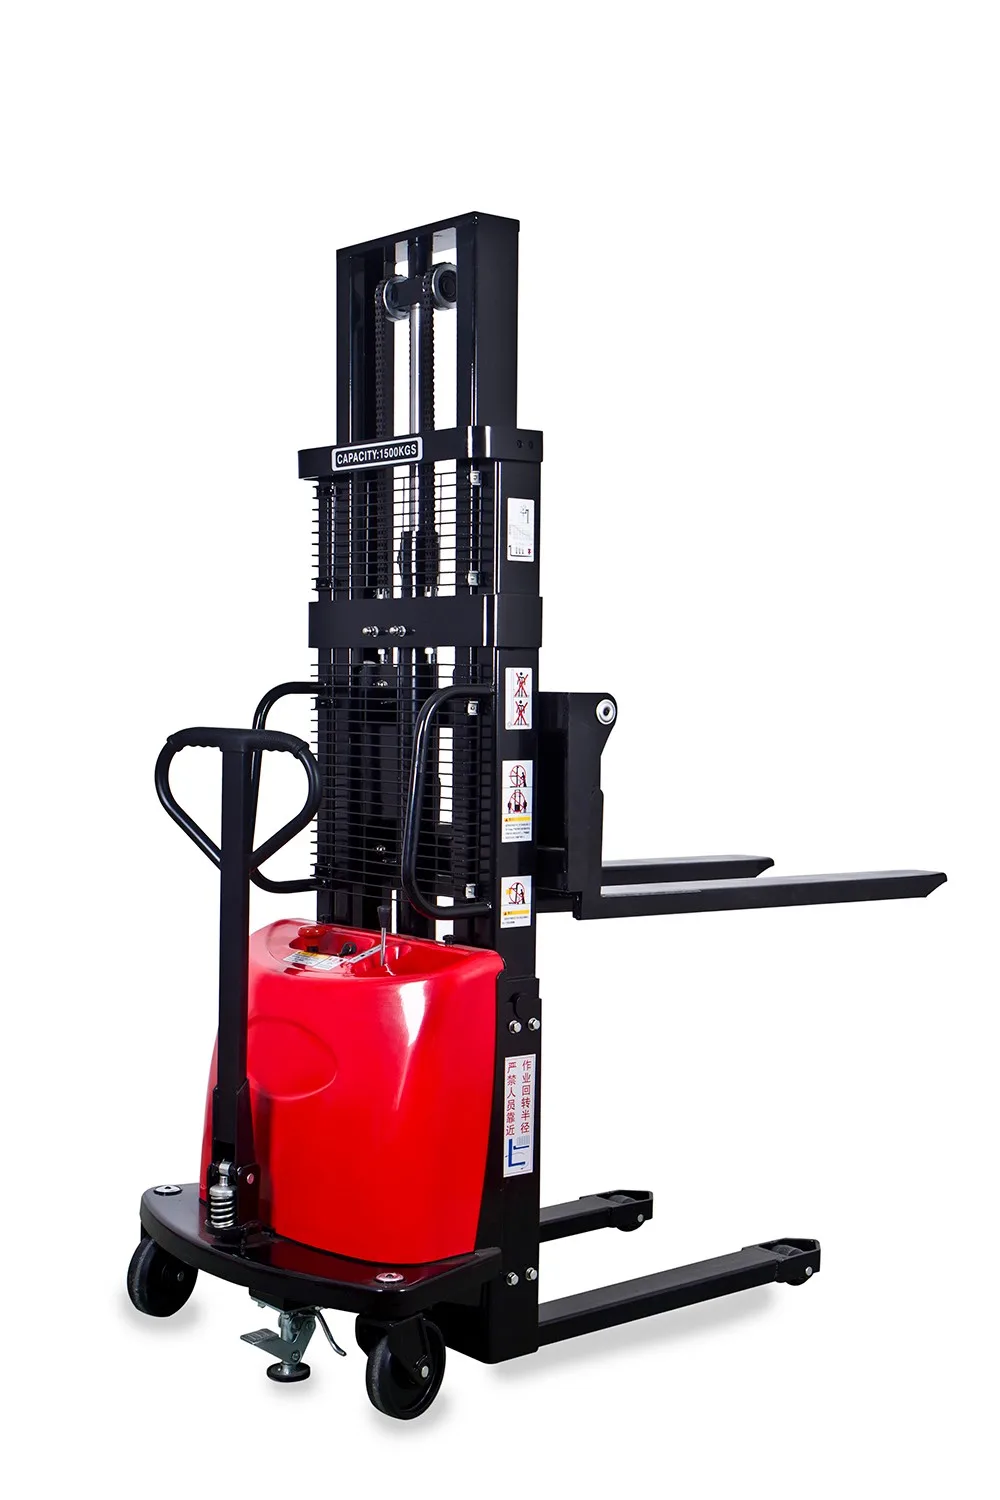 manual stacker manufacturers in india